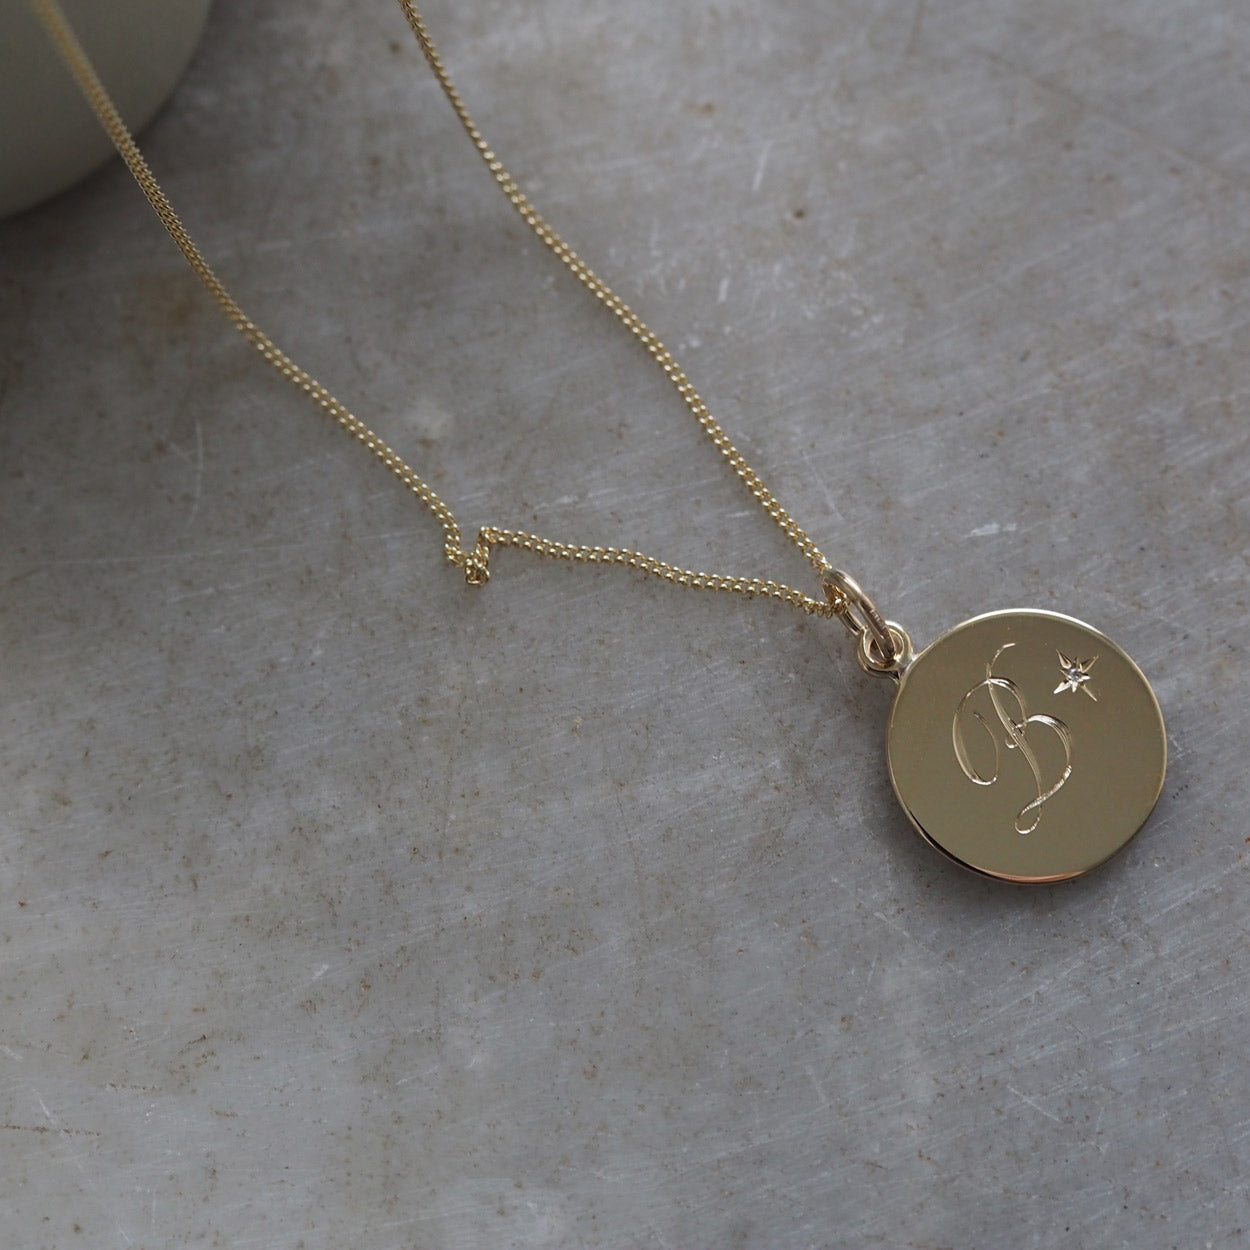 Elegant jewel box DUTY-FREE Custom Initial necklace in solid gold  9k,14k&18k, Personalised Monogram necklace for women, Tiny disc necklace  for everyday, Personalized gift for her, 8mm : Amazon.co.uk: Handmade  Products